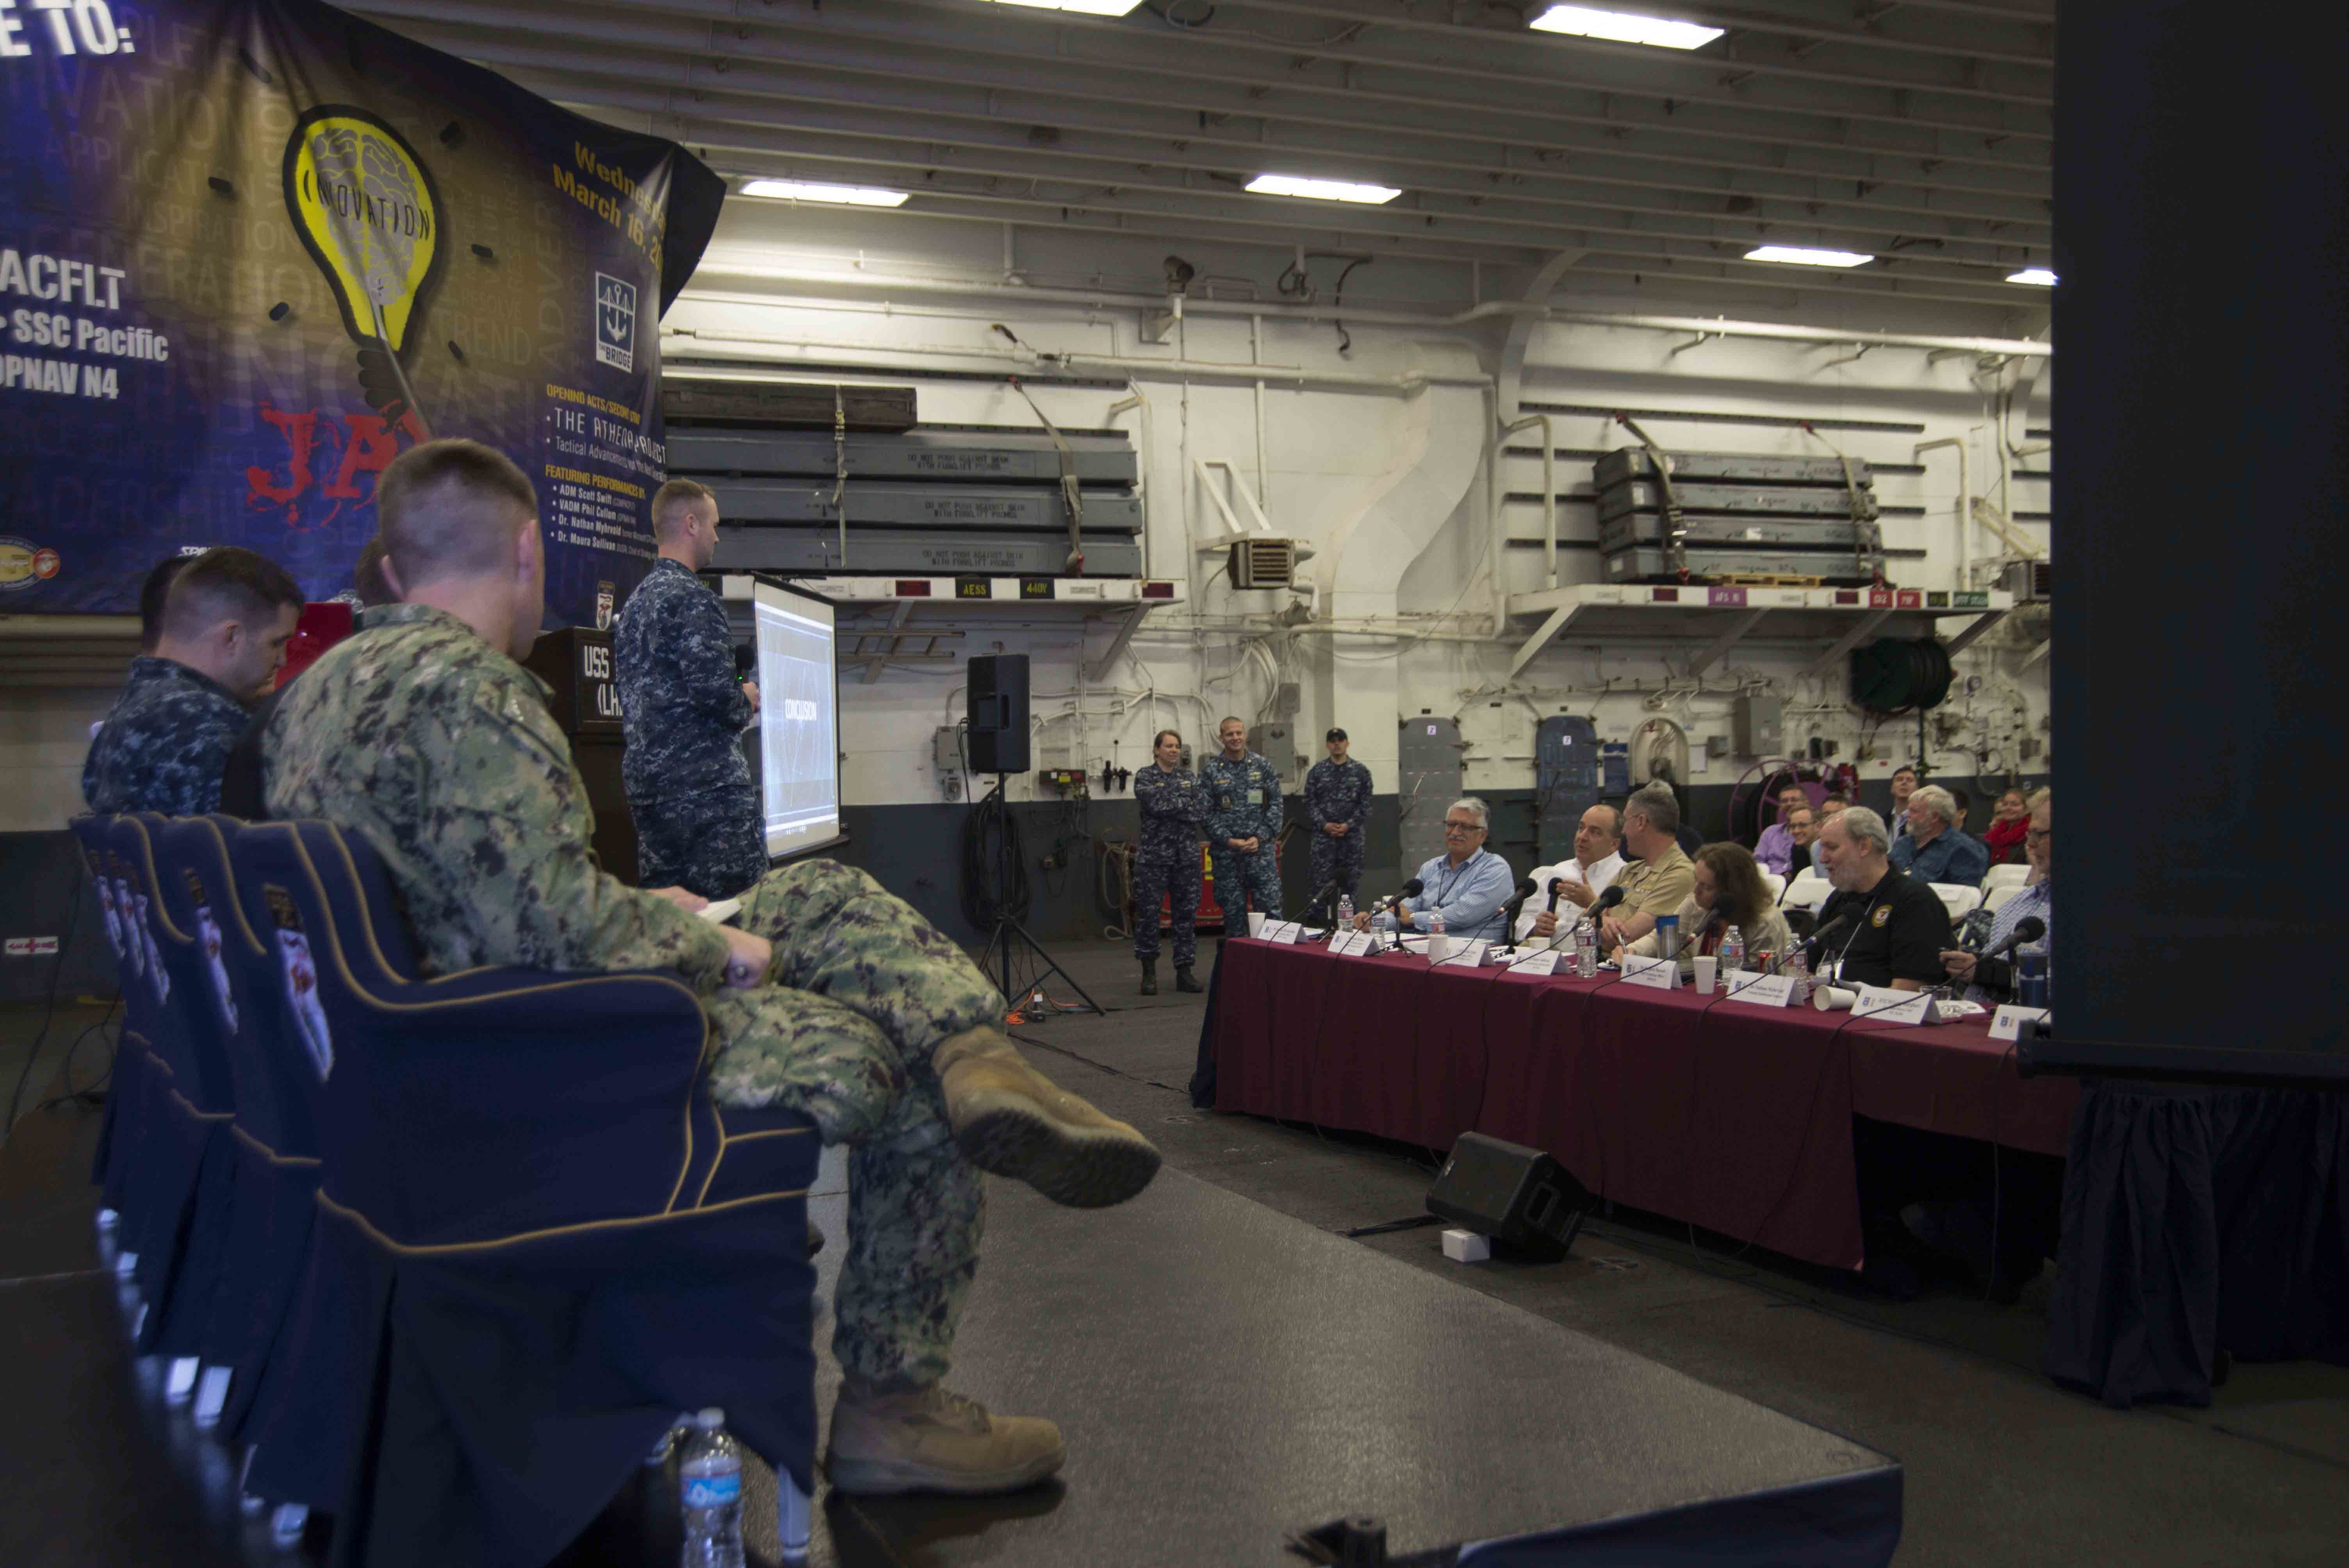 Lt. j.g. Rob McClenning answers questions from panel members about his new product pitch at the March 2016 Innovation Jam hosted aboard Wasp-class amphibious assault ship USS Essex (LHD 2). The Innovation Jam showcase pioneering concepts and rapid solutions to the fleet by SSC Pacific, the Athena Project, Tactical Advancements for the Next Generation and the Hatch. US Navy photo.